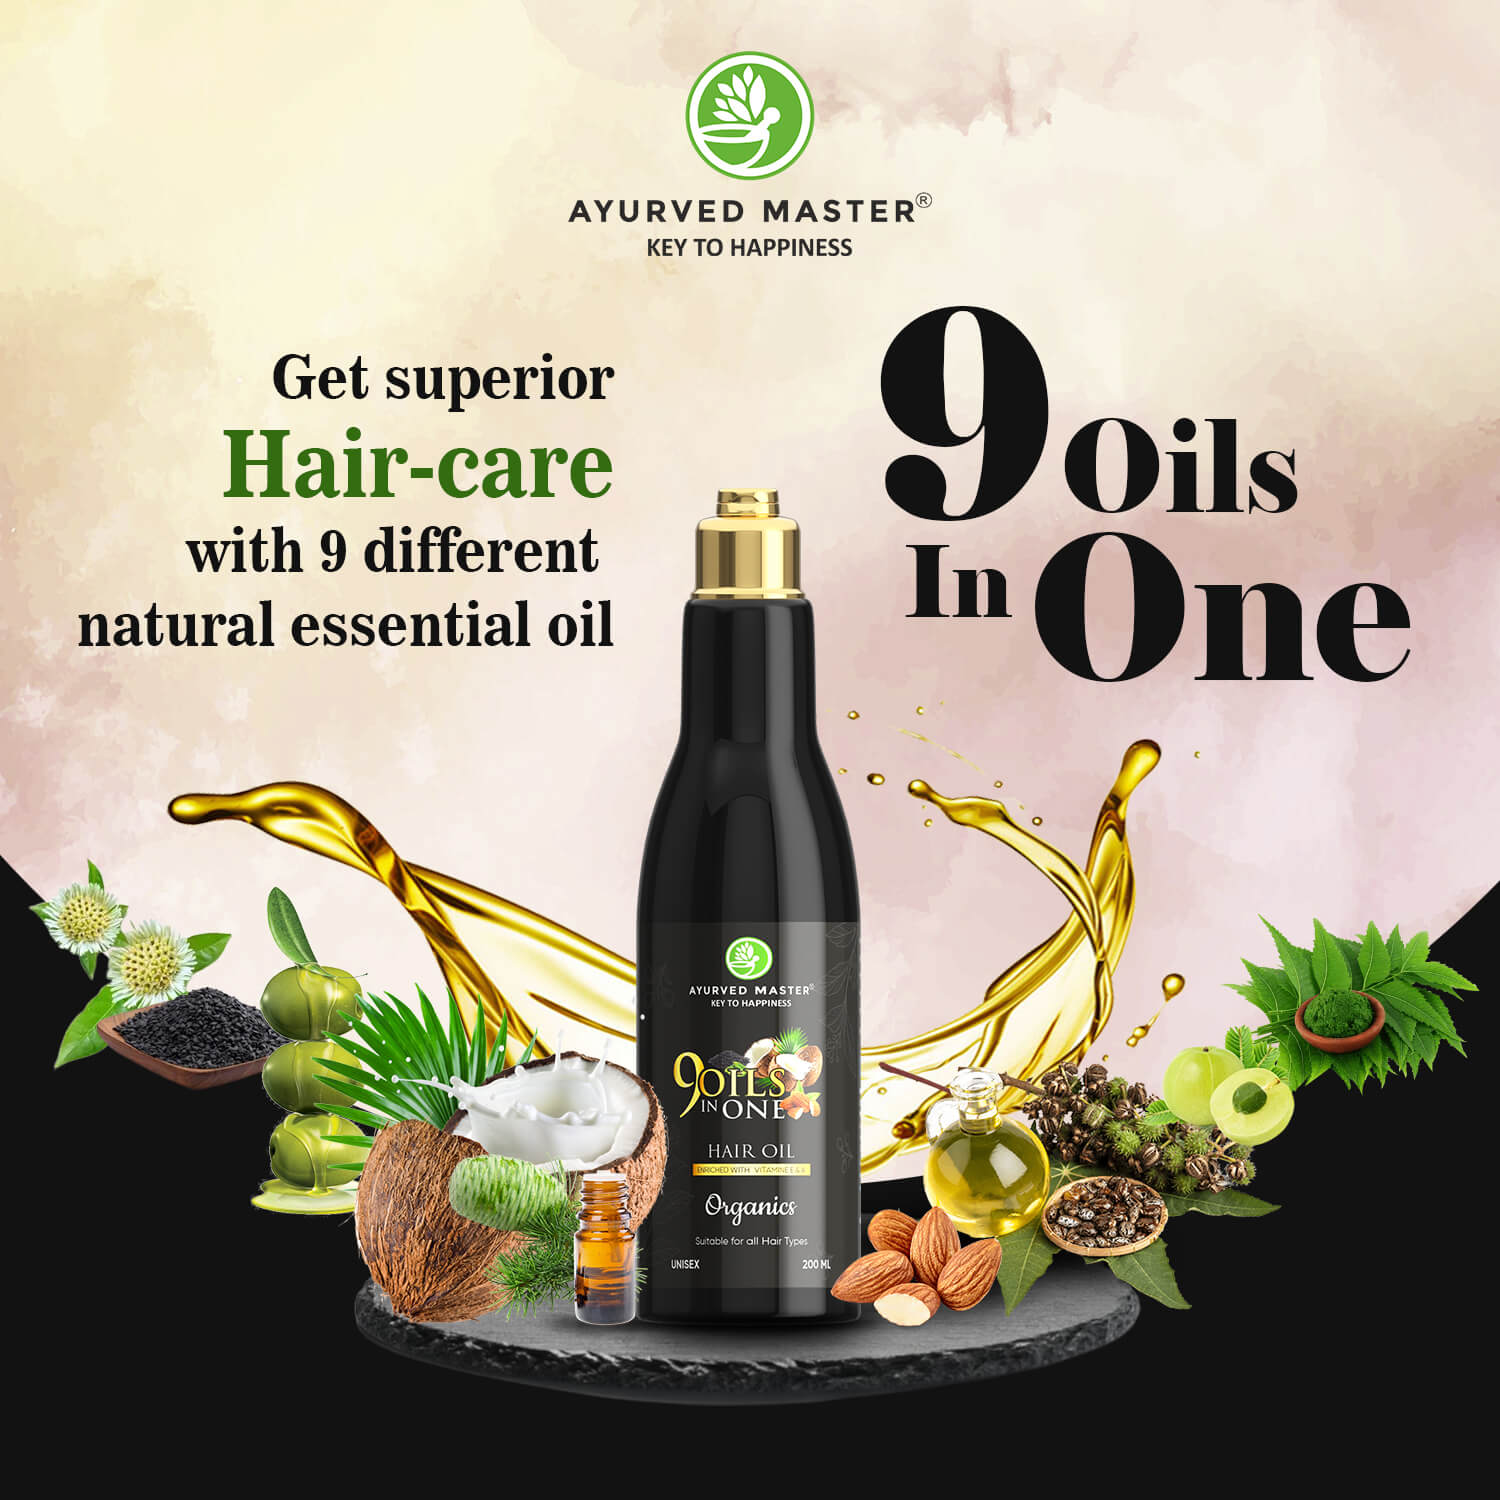 Ayurved Master 9-oil-in-1 Herbal Hair oil Revitalizing Elixir - Your Ultimate Solution for Nourished, Strengthened, and Lustrous Beauty Hair